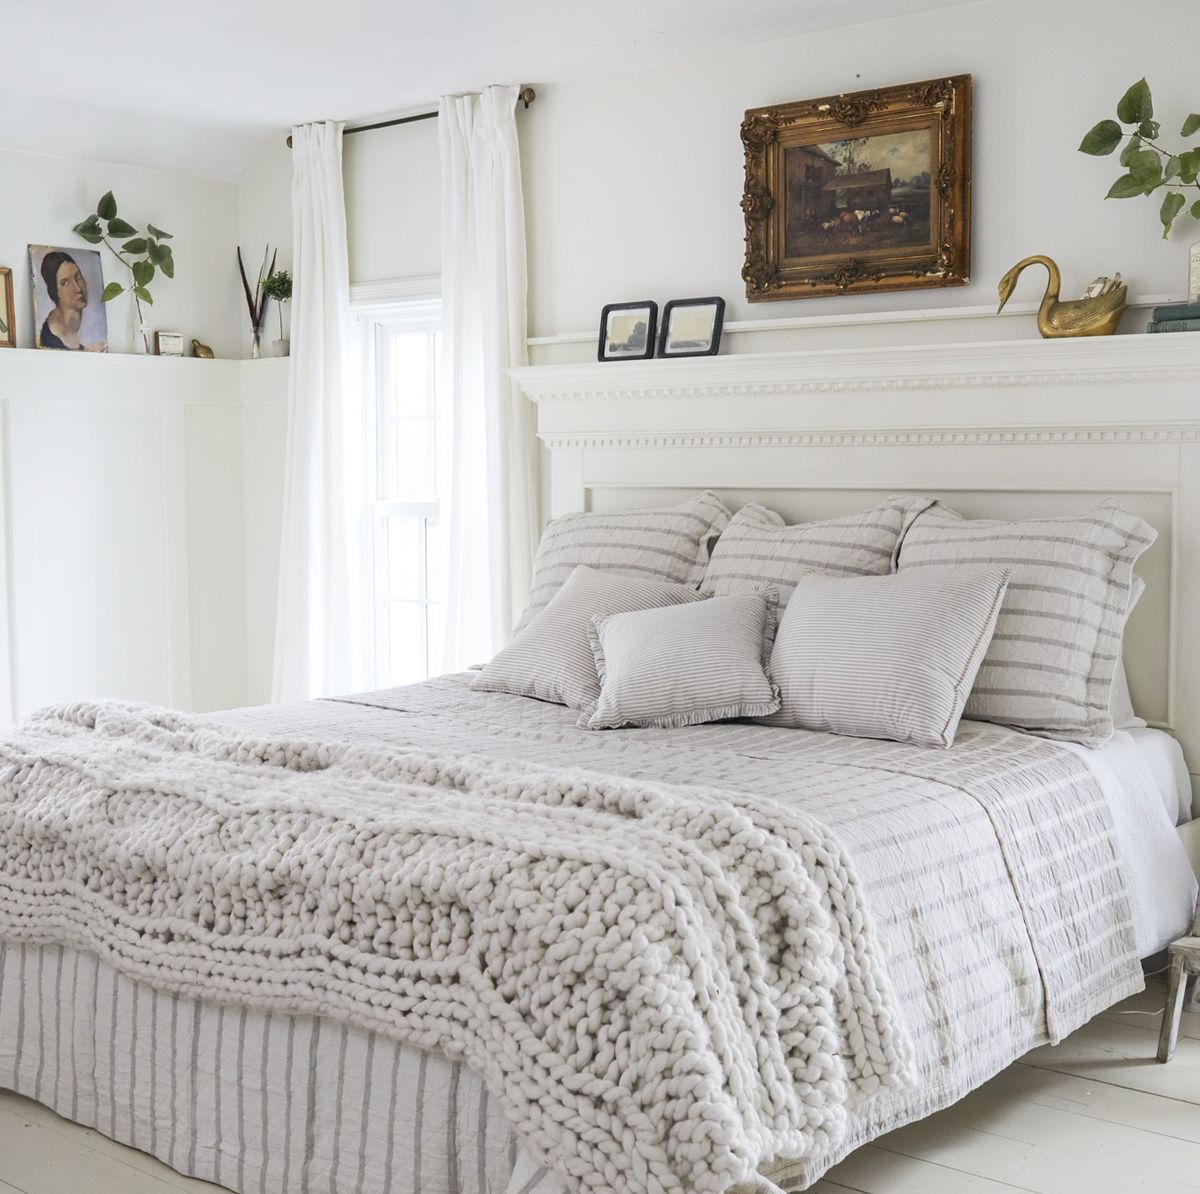 How to style a perfectly cozy bedroom? –